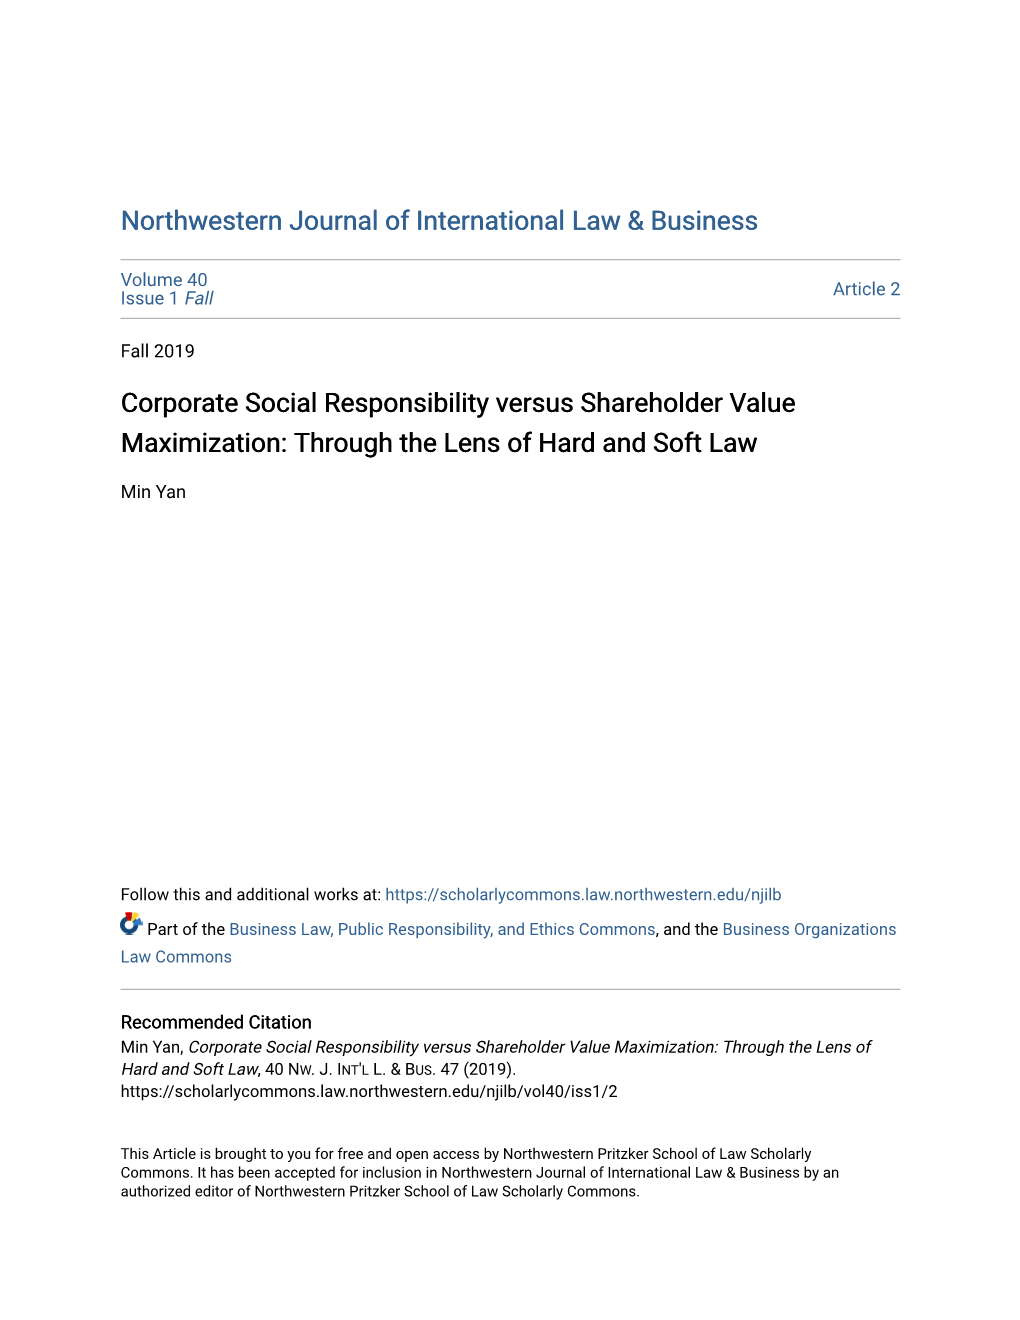 Corporate Social Responsibility Versus Shareholder Value Maximization: Through the Lens of Hard and Soft Law